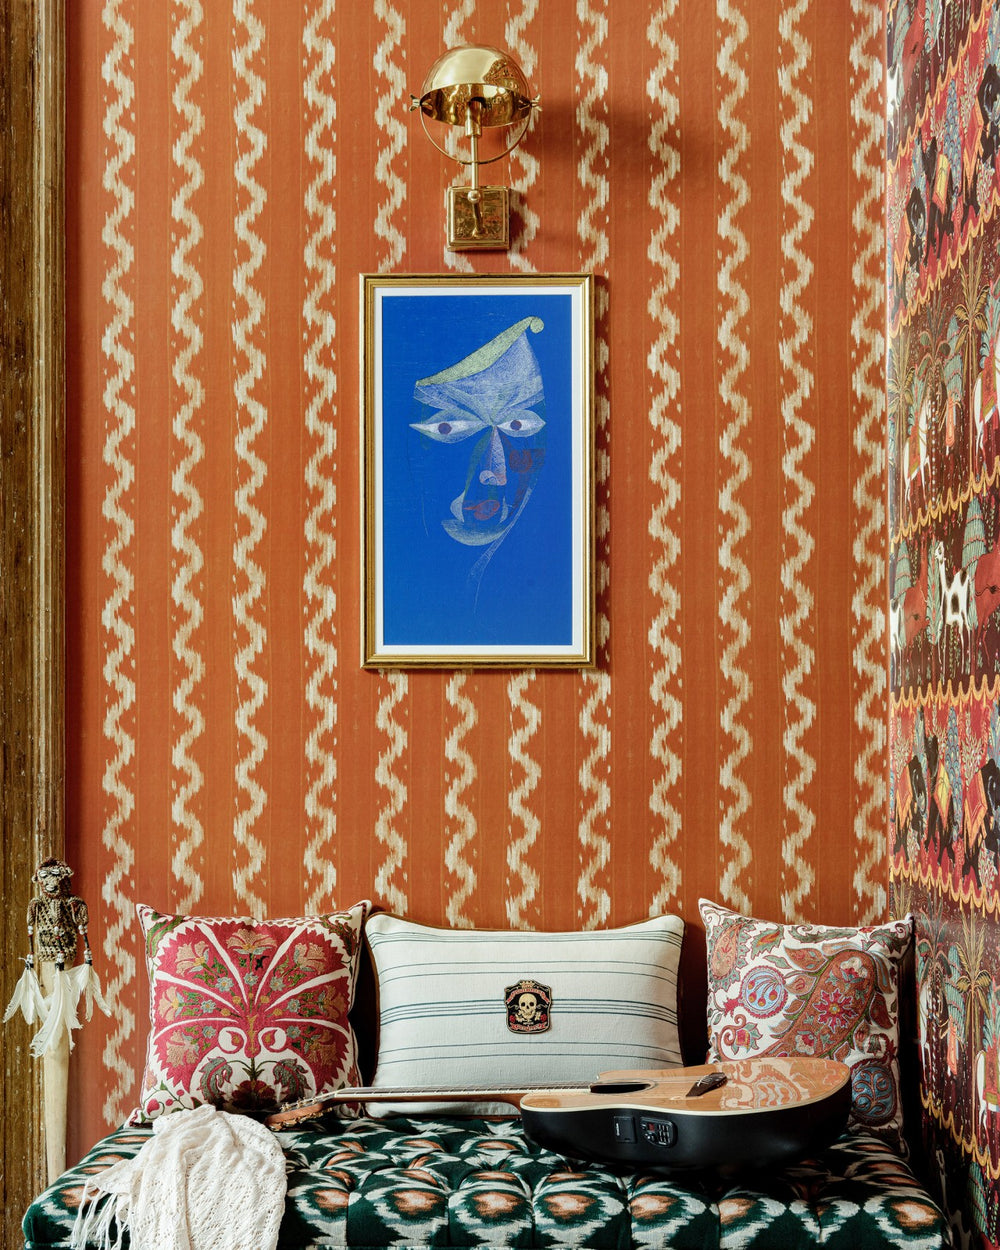 Mind the Gap VINTAGE IKAT Apricot on the wall Lifestyle Image, Wallpaper Wallcovering MTG